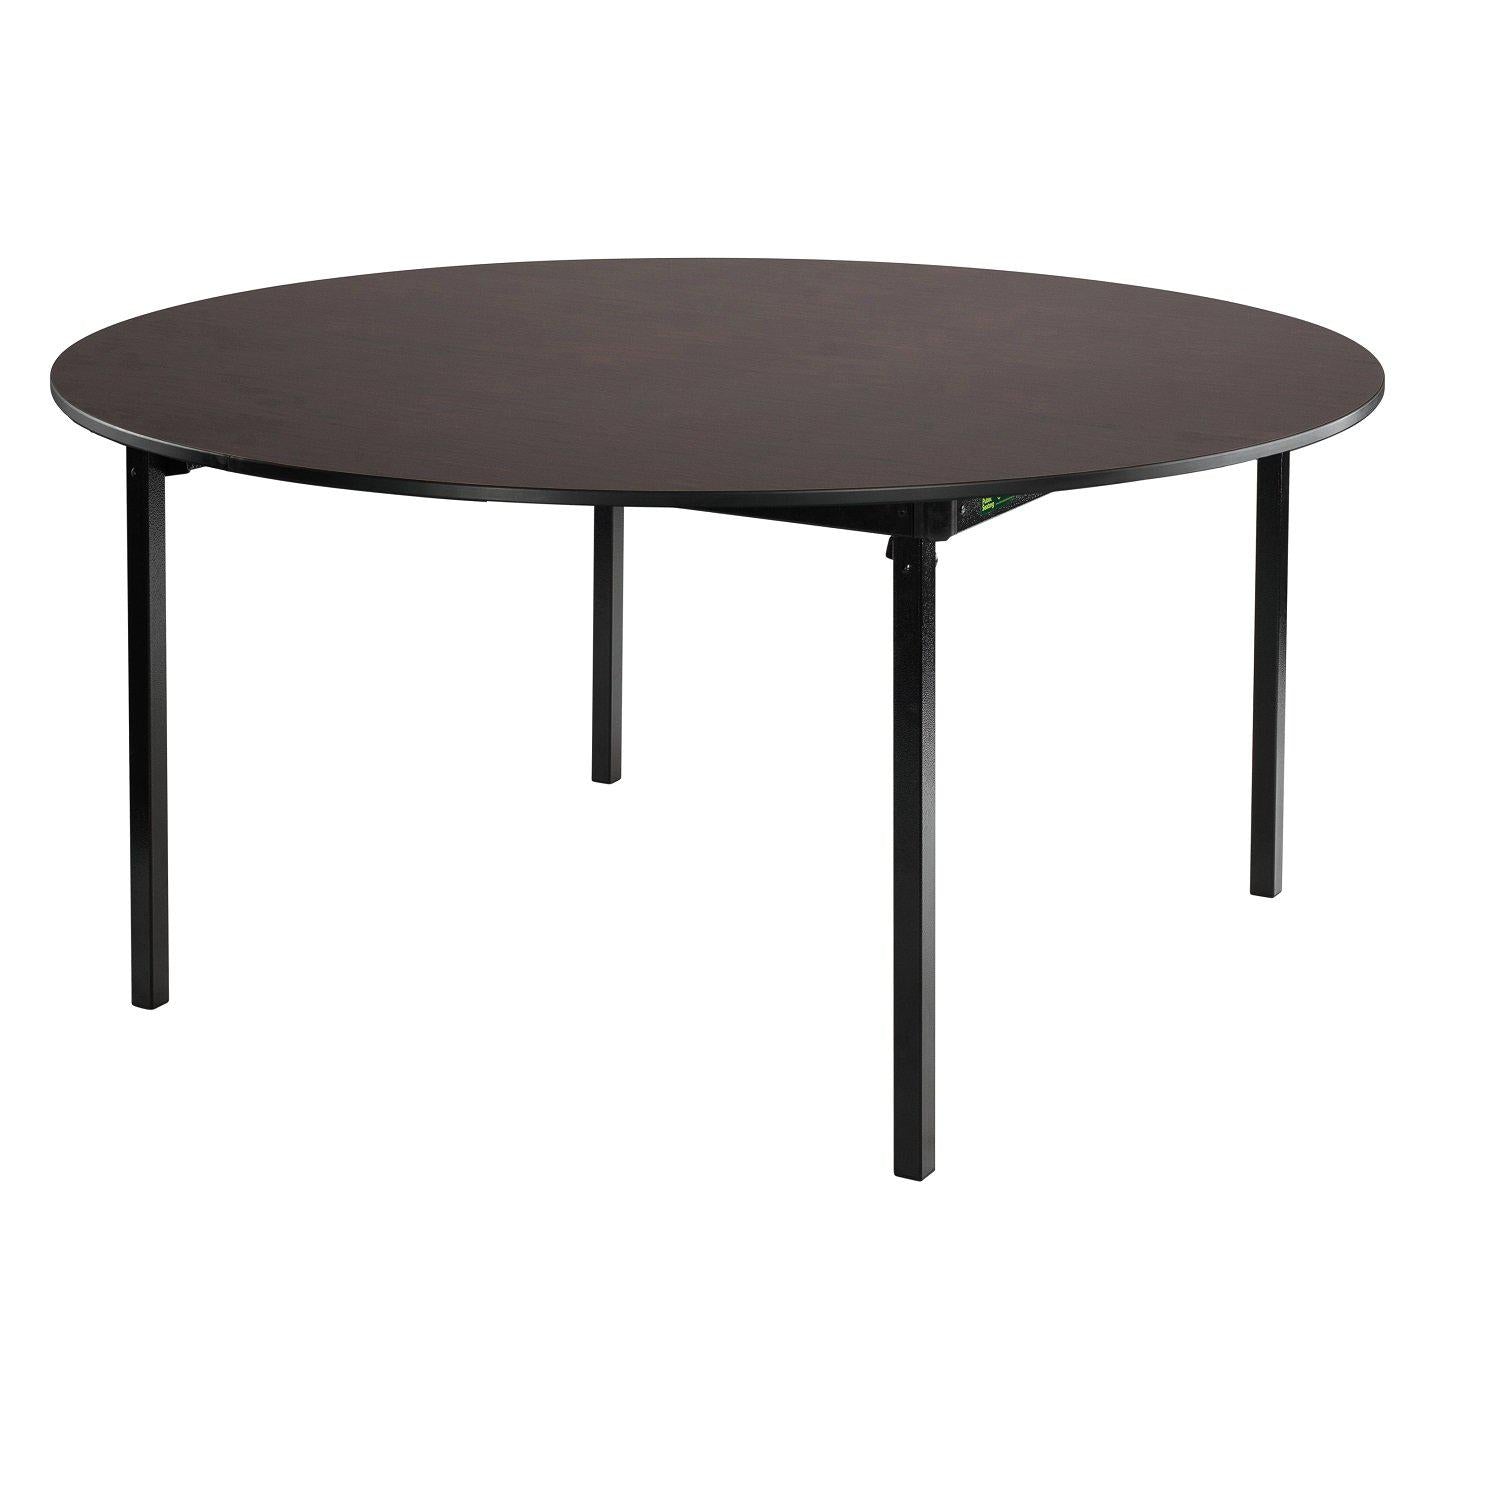 Max Seating Folding Table, 60" Round, Particleboard Core, High Pressure Laminate Top with T-Mold Edging